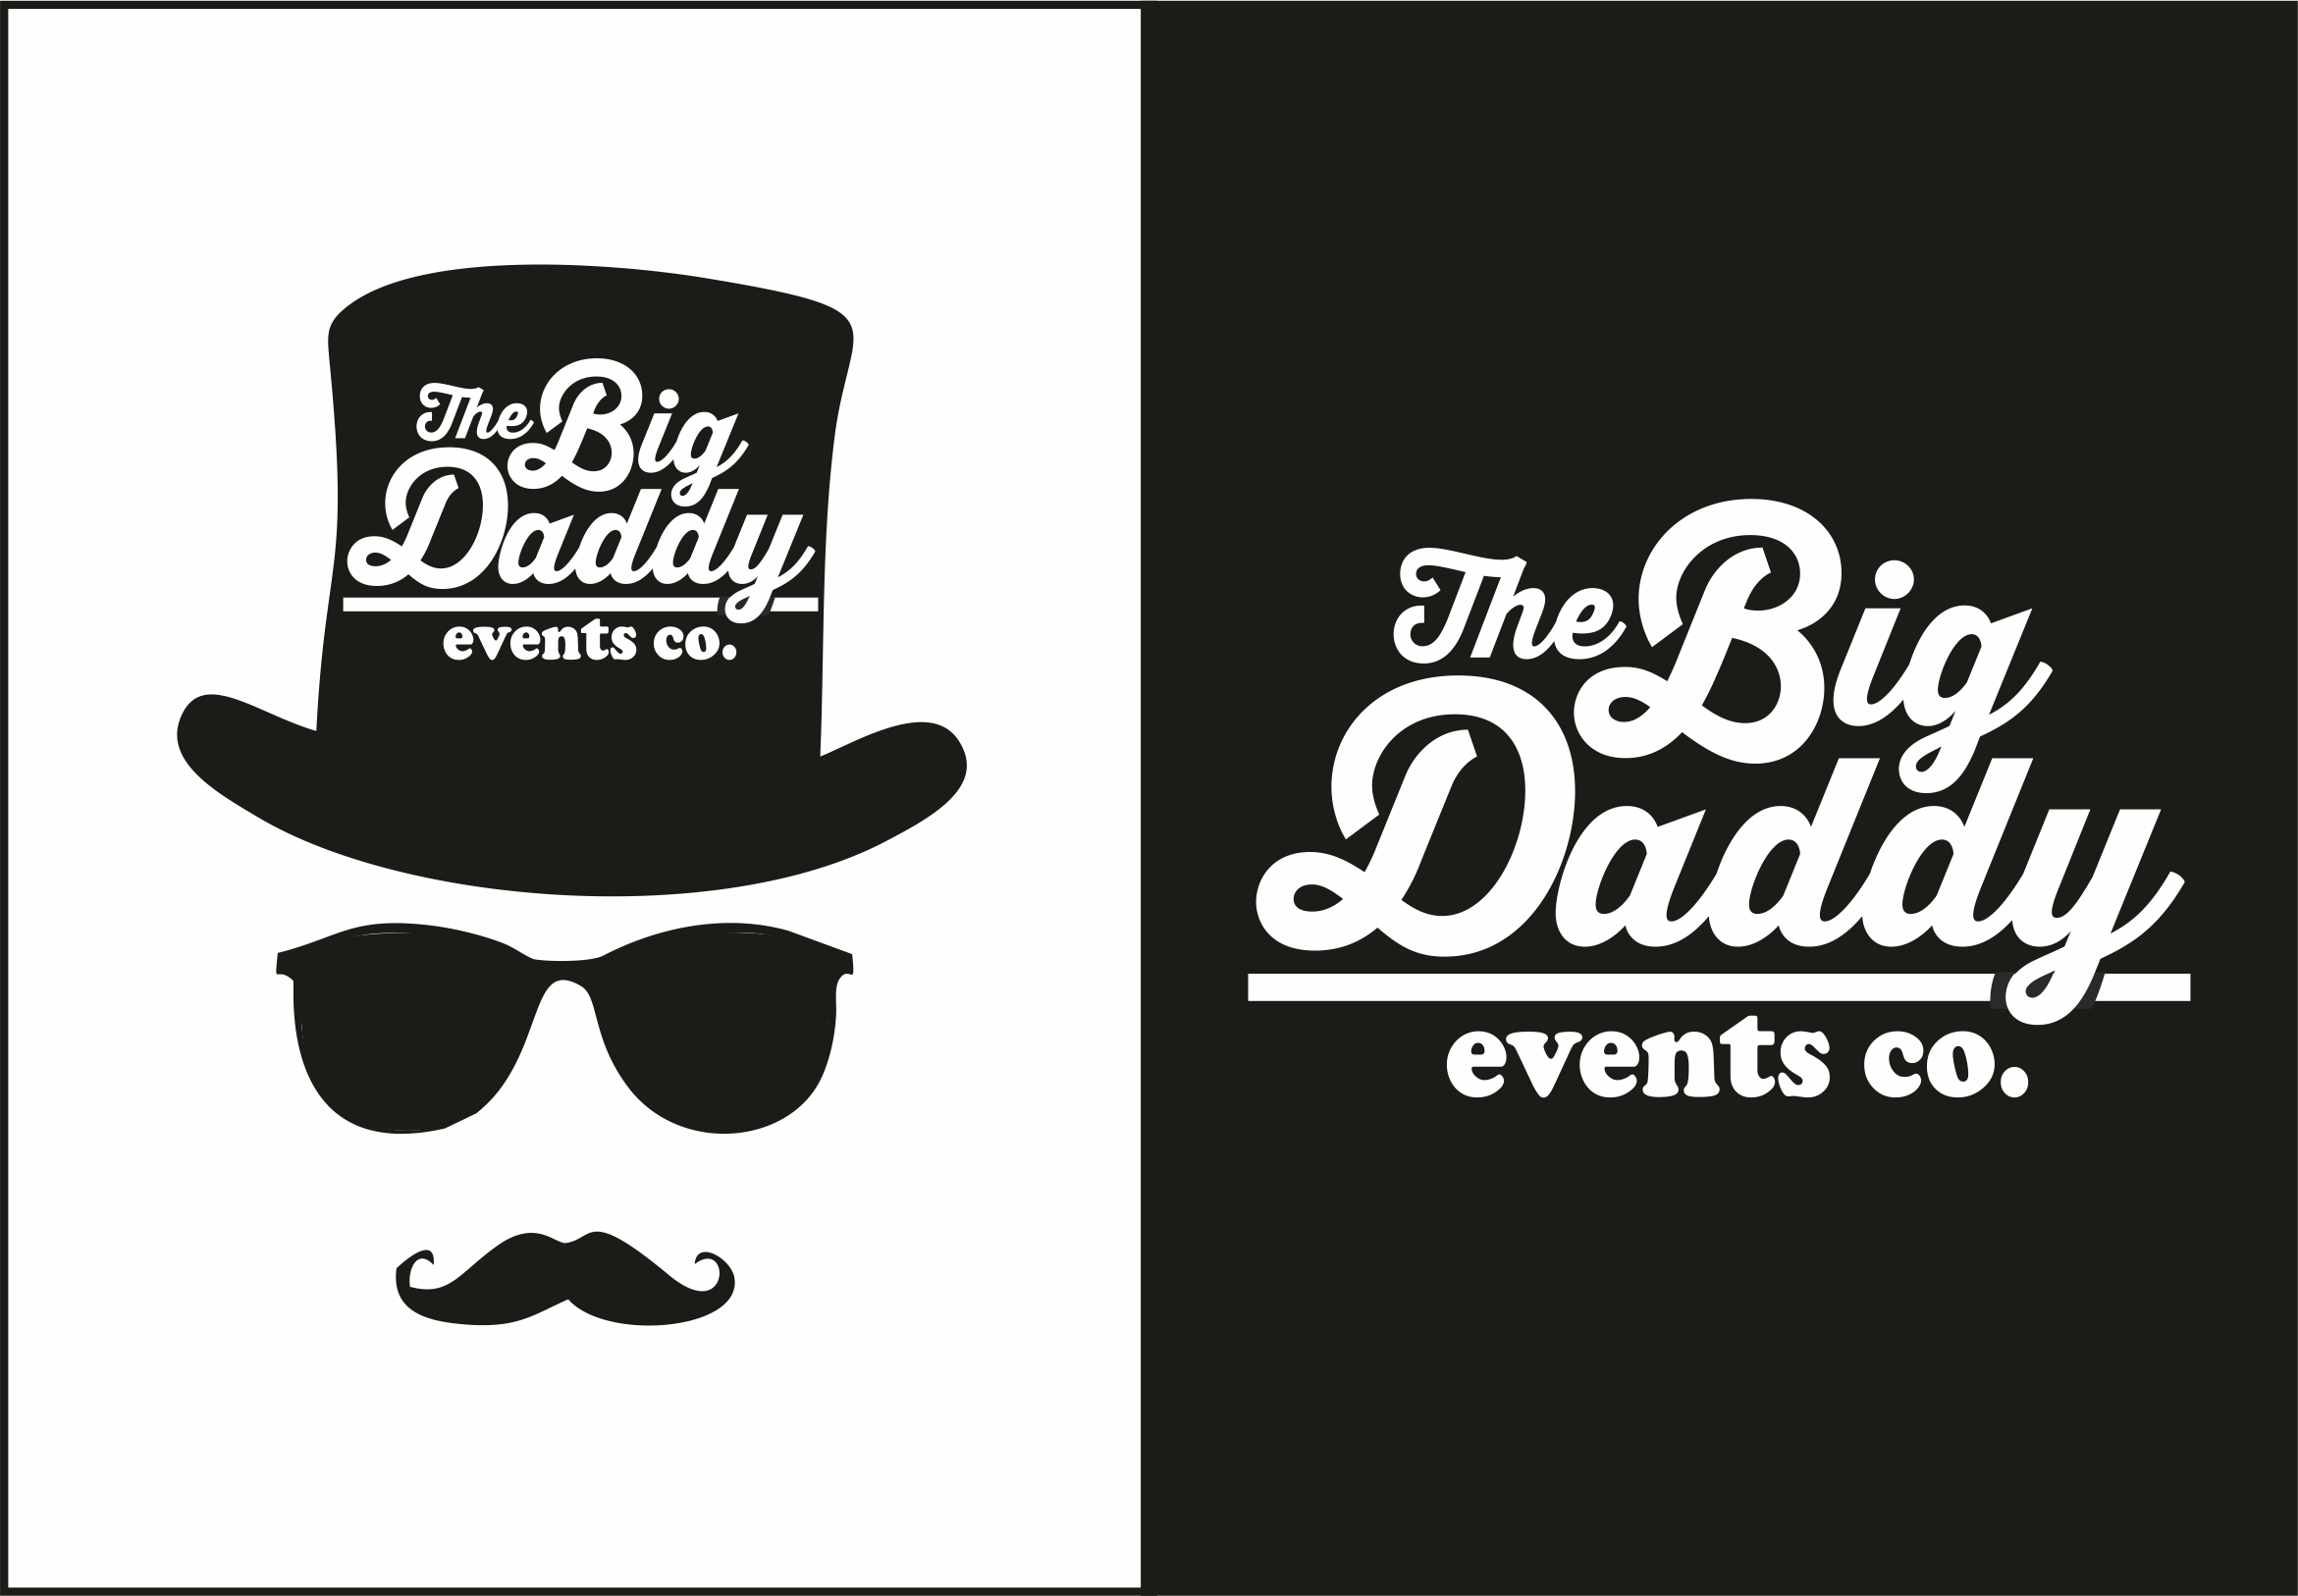  The Big Daddy Events Company